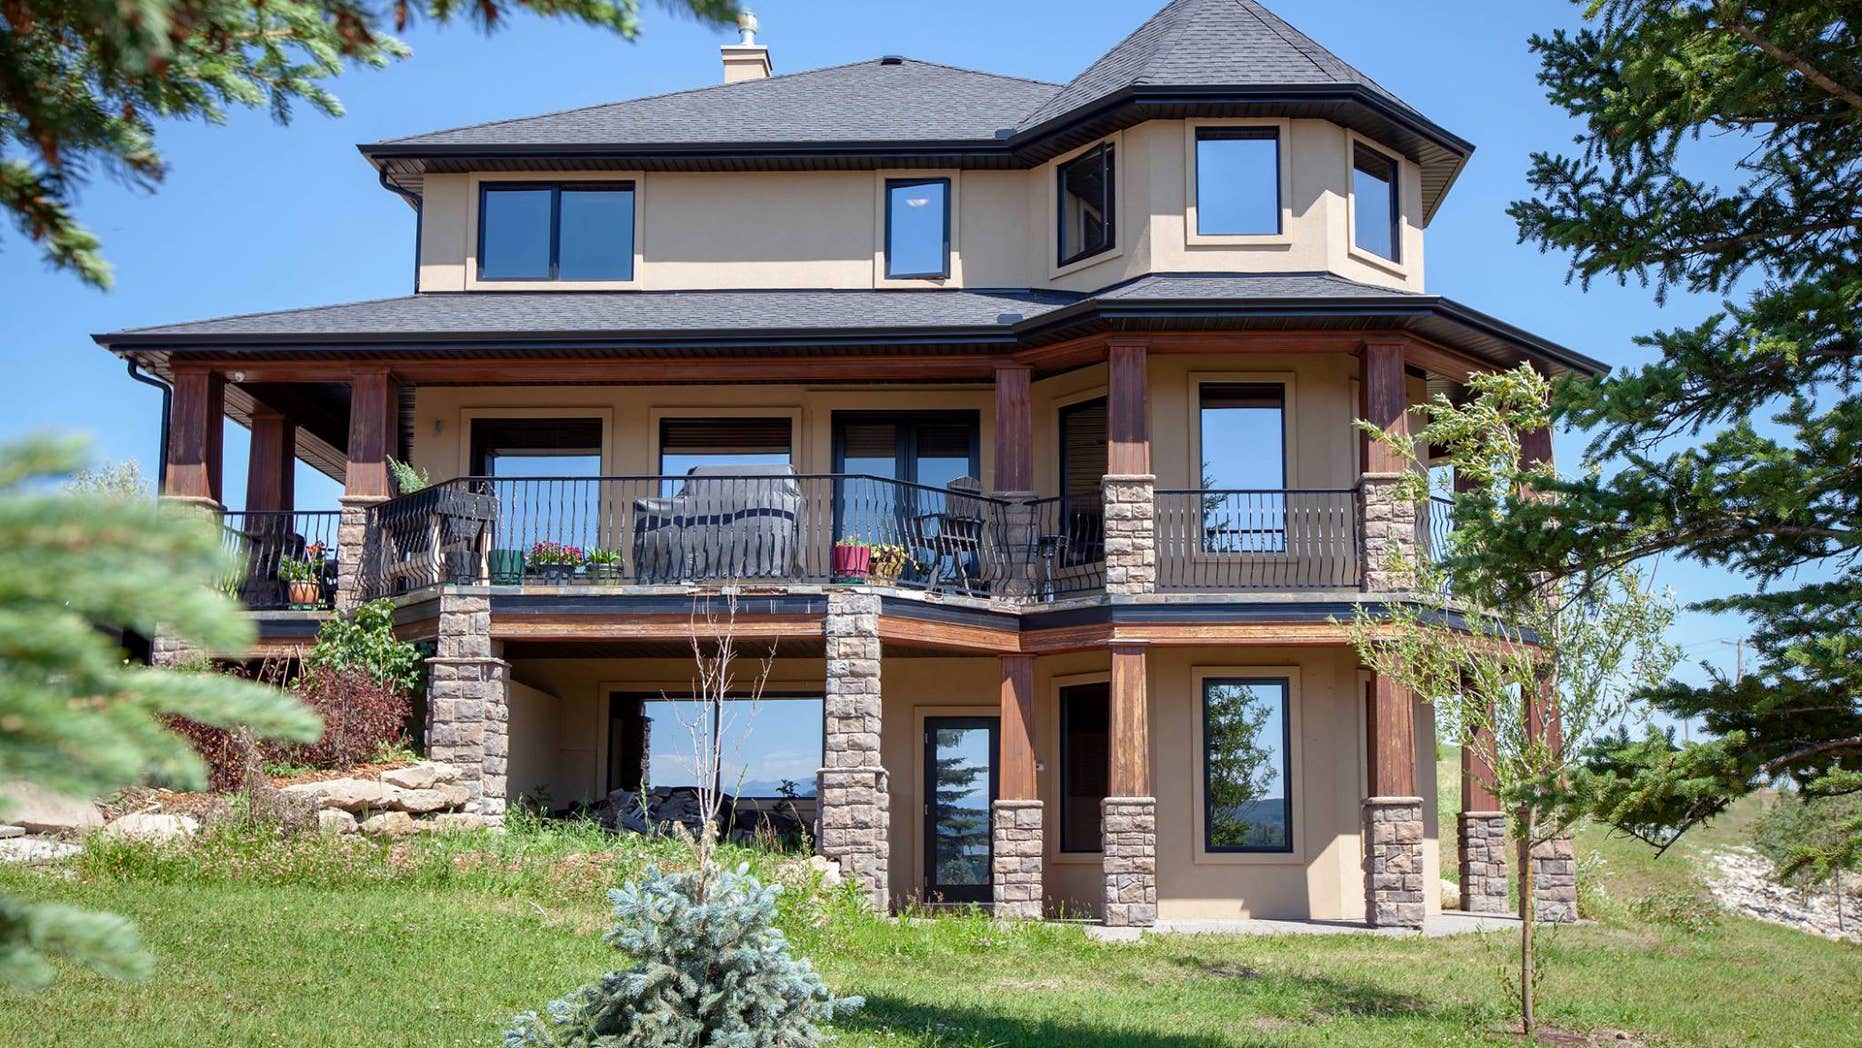 Alberta homeowner announces contest for $1.7M home: $25 and an essay